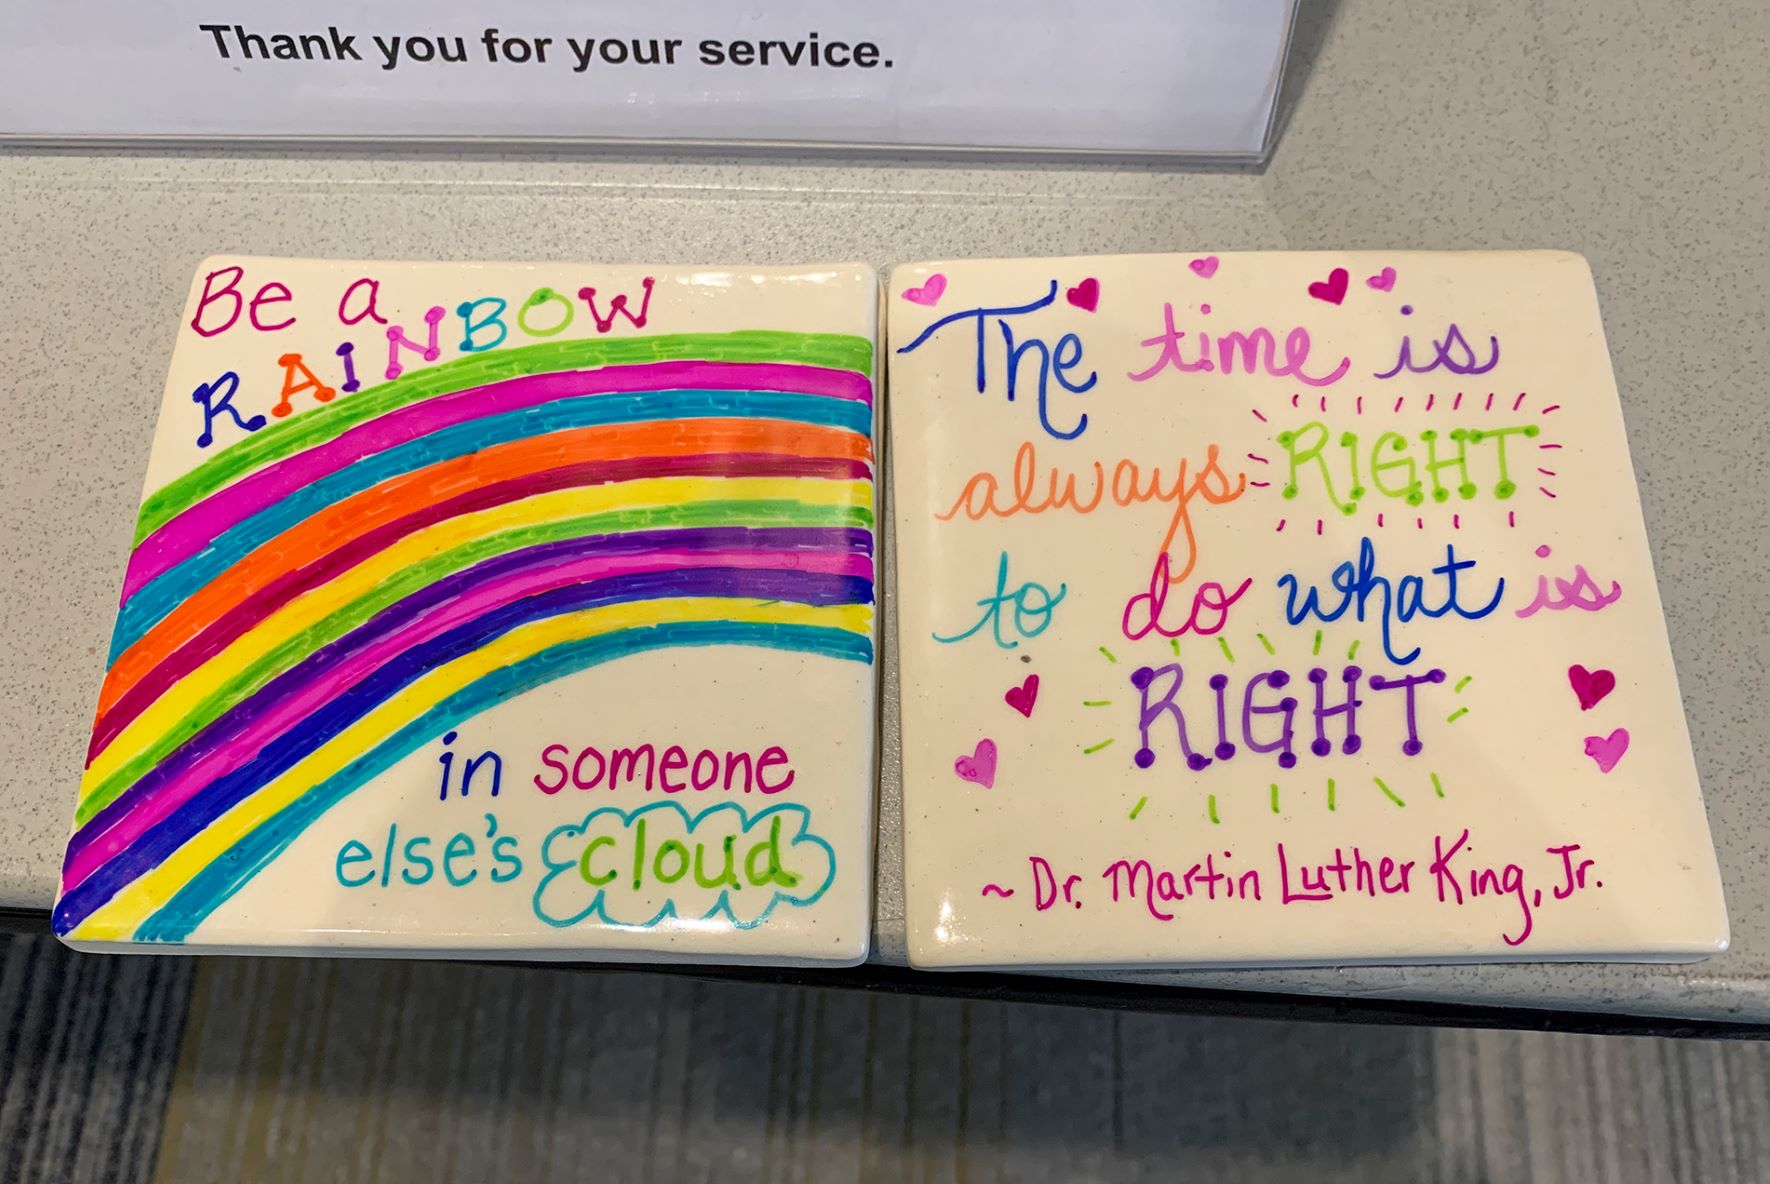 Two of the over 200 tiles that were painted by Stockton community members during the 18th annual MLK Day of Service.